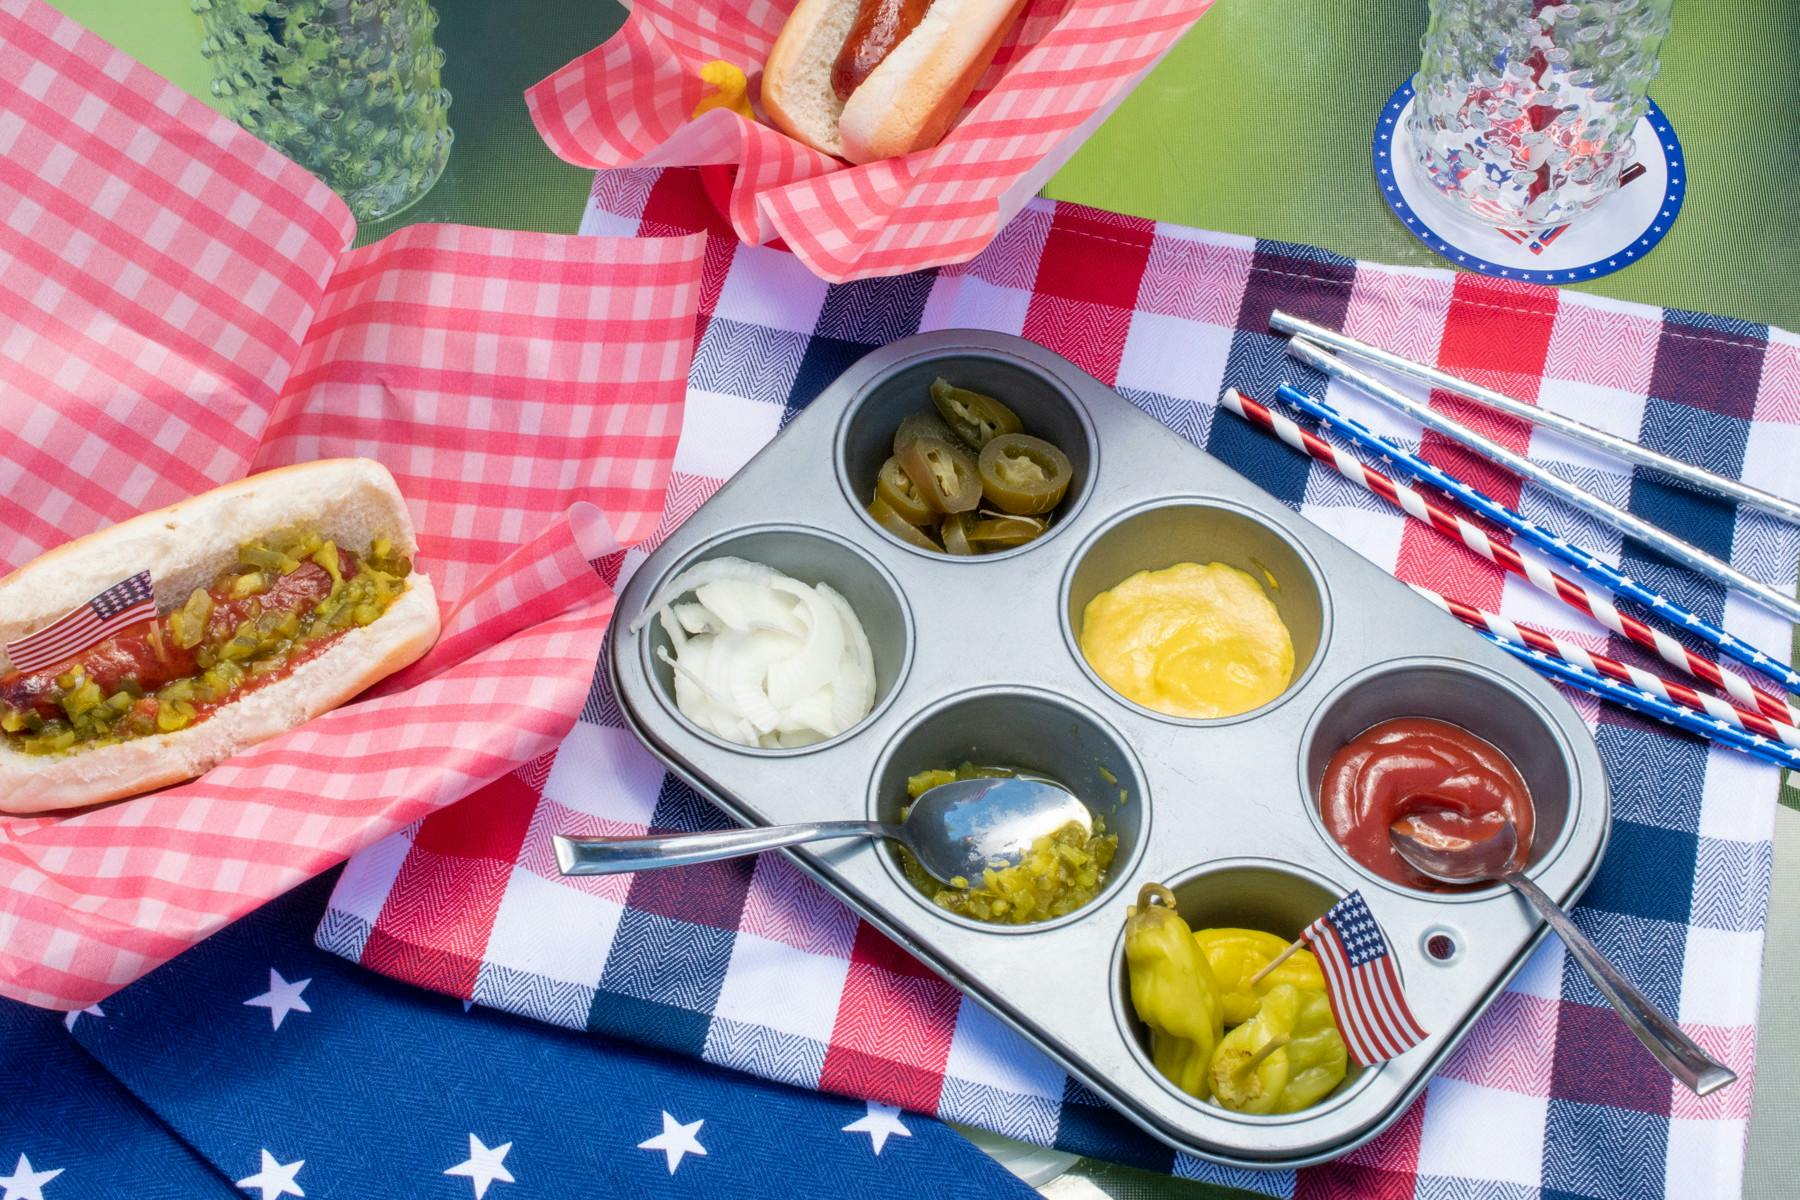 A muffin pan filled with different condiments sitting on a table decorated for the 4th of July.